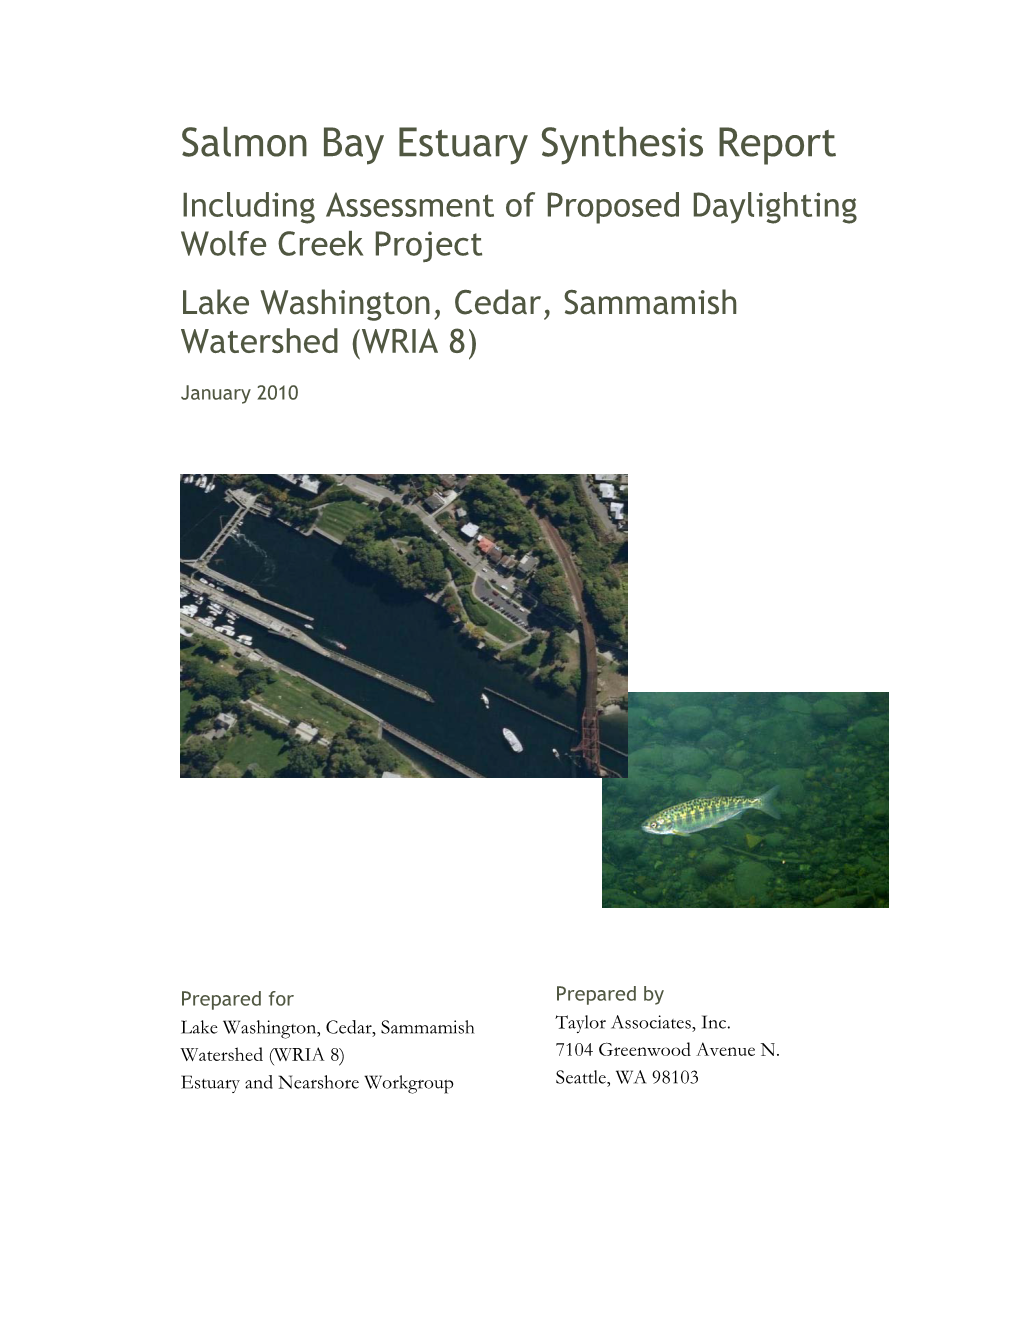 Salmon Bay Estuary Synthesis Report Including Assessment of Proposed Daylighting Wolfe Creek Project Lake Washington, Cedar, Sammamish Watershed (WRIA 8)